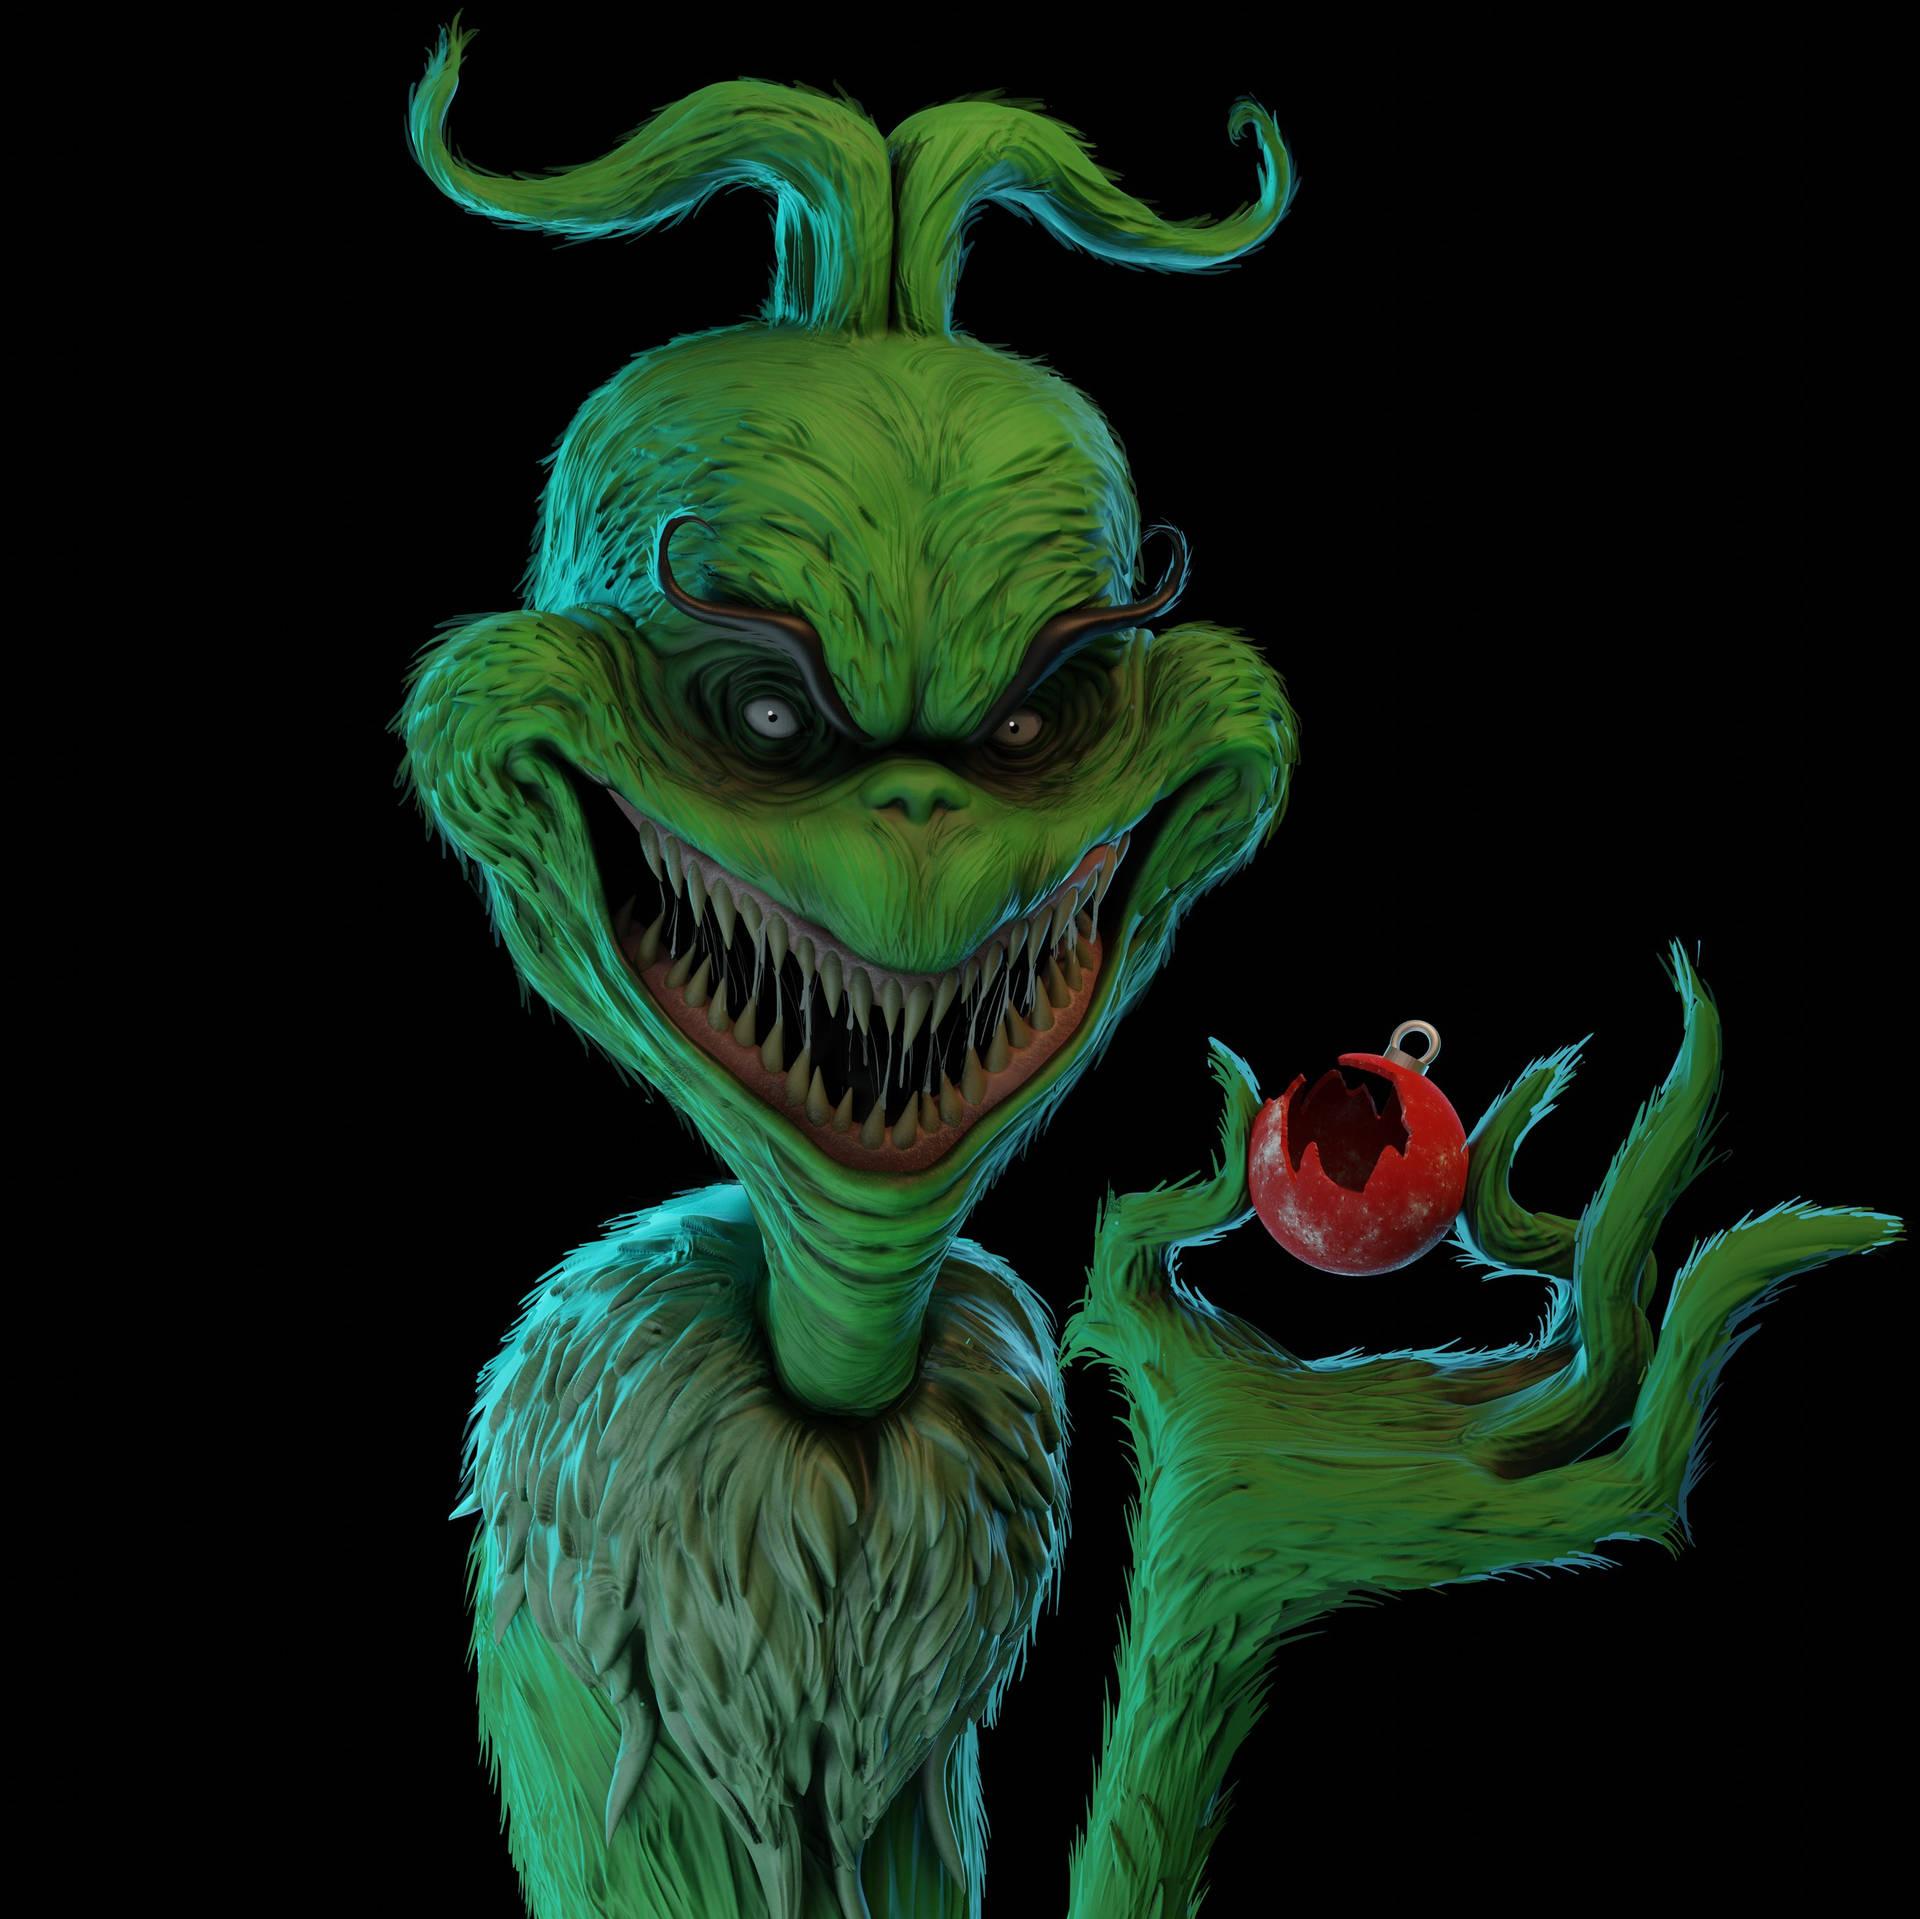  Grinch Wallpapers